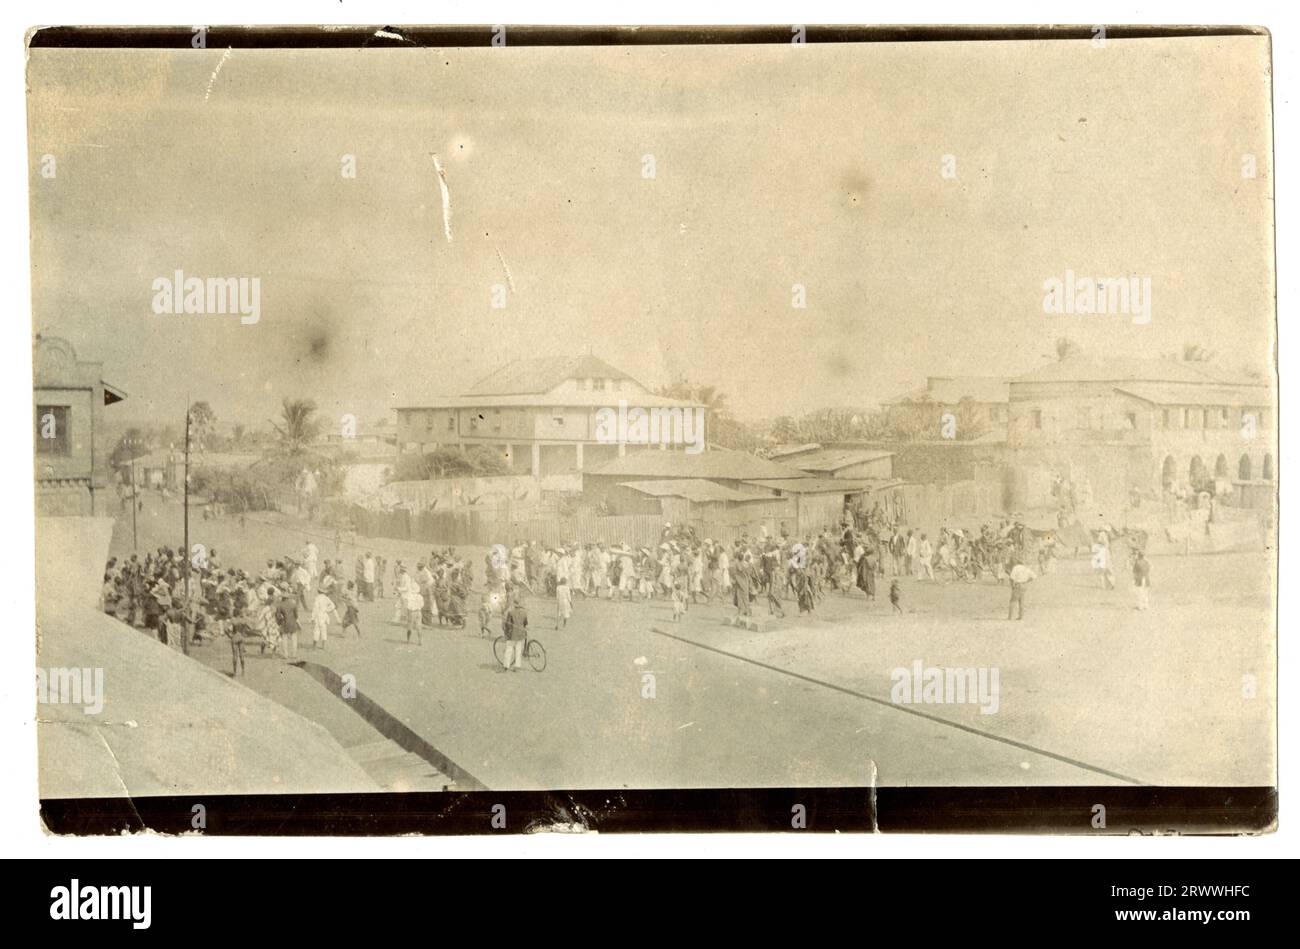 Street scene in Accra, showing a large crowd of people possibly waiting for an event or queuing to gain entry to something. The queue stretches across the street and includes people with bicycles and muscial instruments. Behind them are some grand buildings, with corrugated iron shacks nearer to the foreground. Original manuscript caption: Accra - Gold Coast. Stock Photo